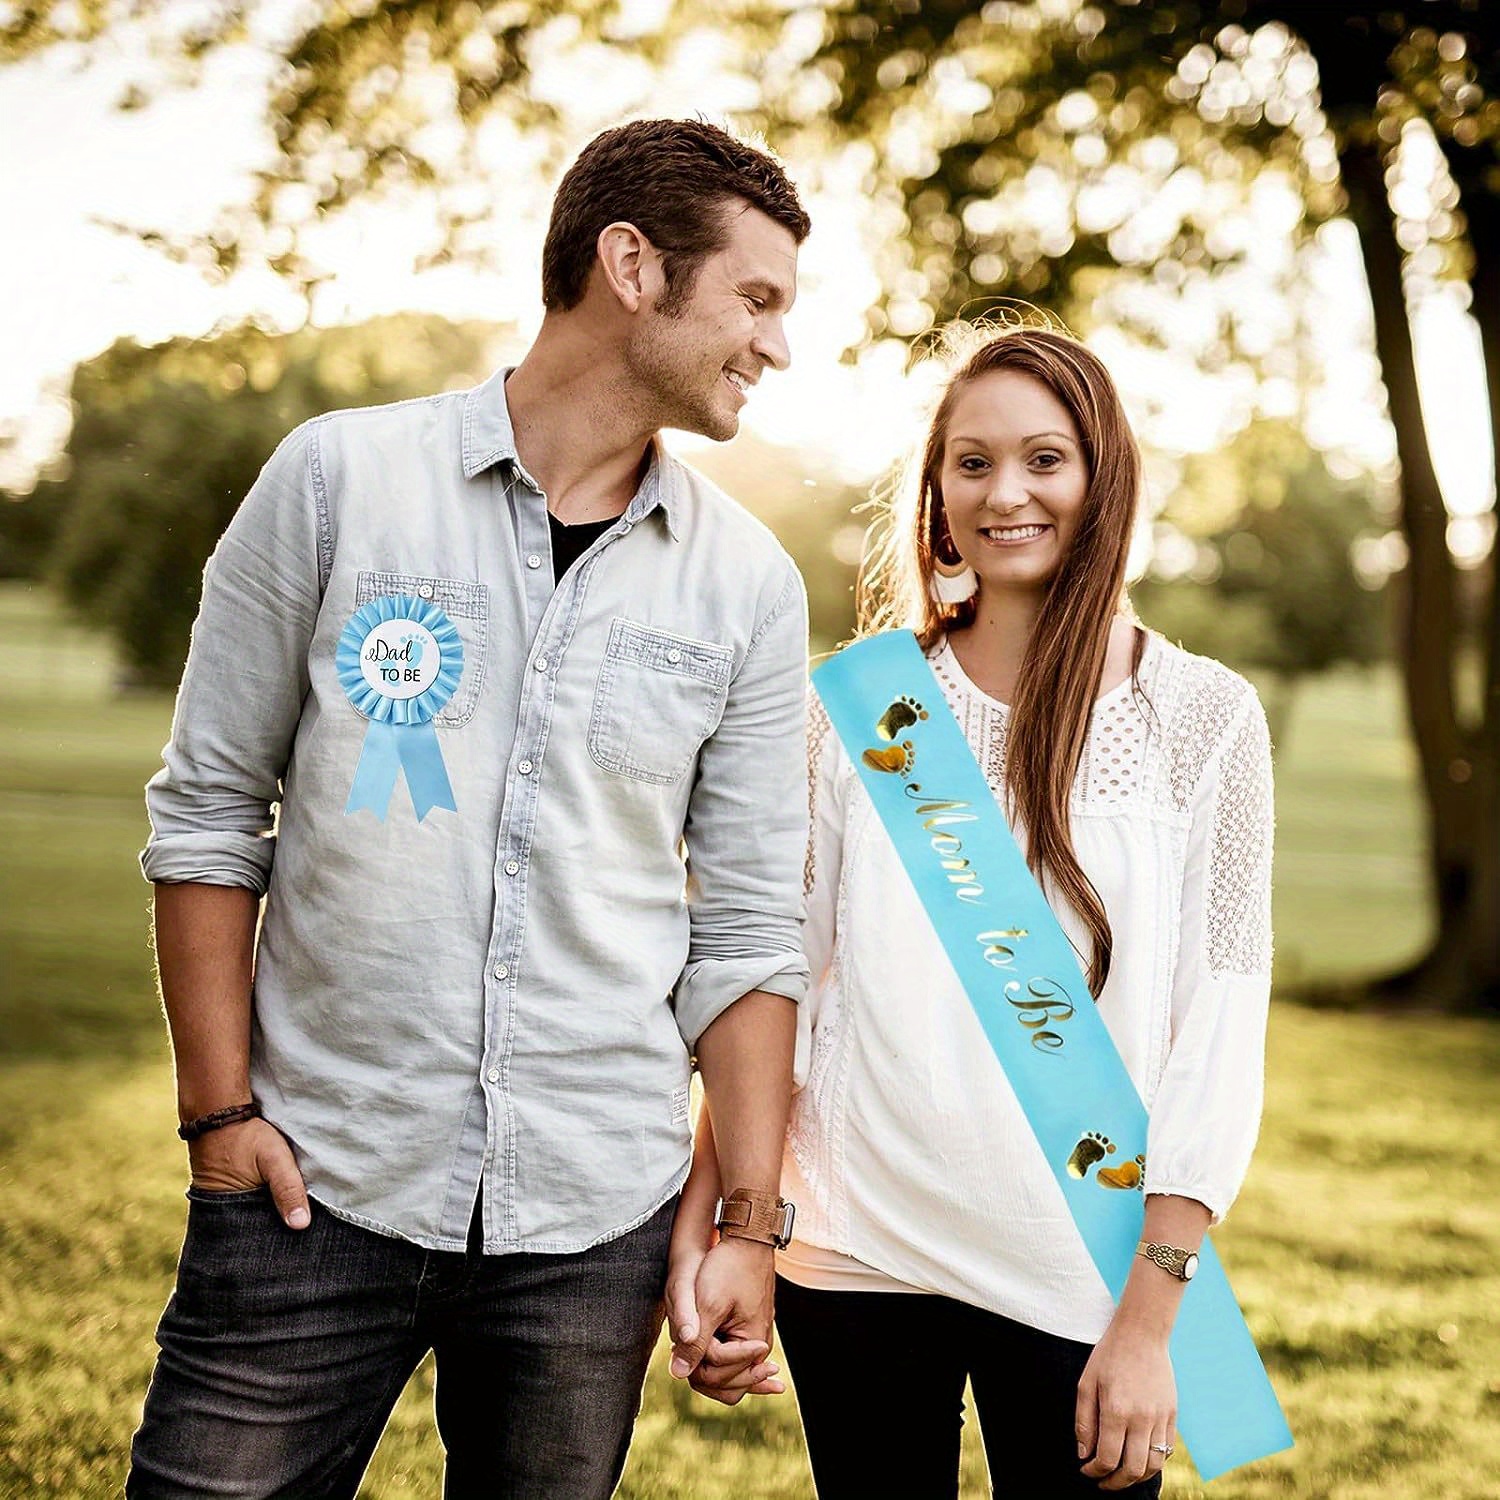 Sky Blue Maternity Sash & Daddy to be Corsage Set - Baby Shower